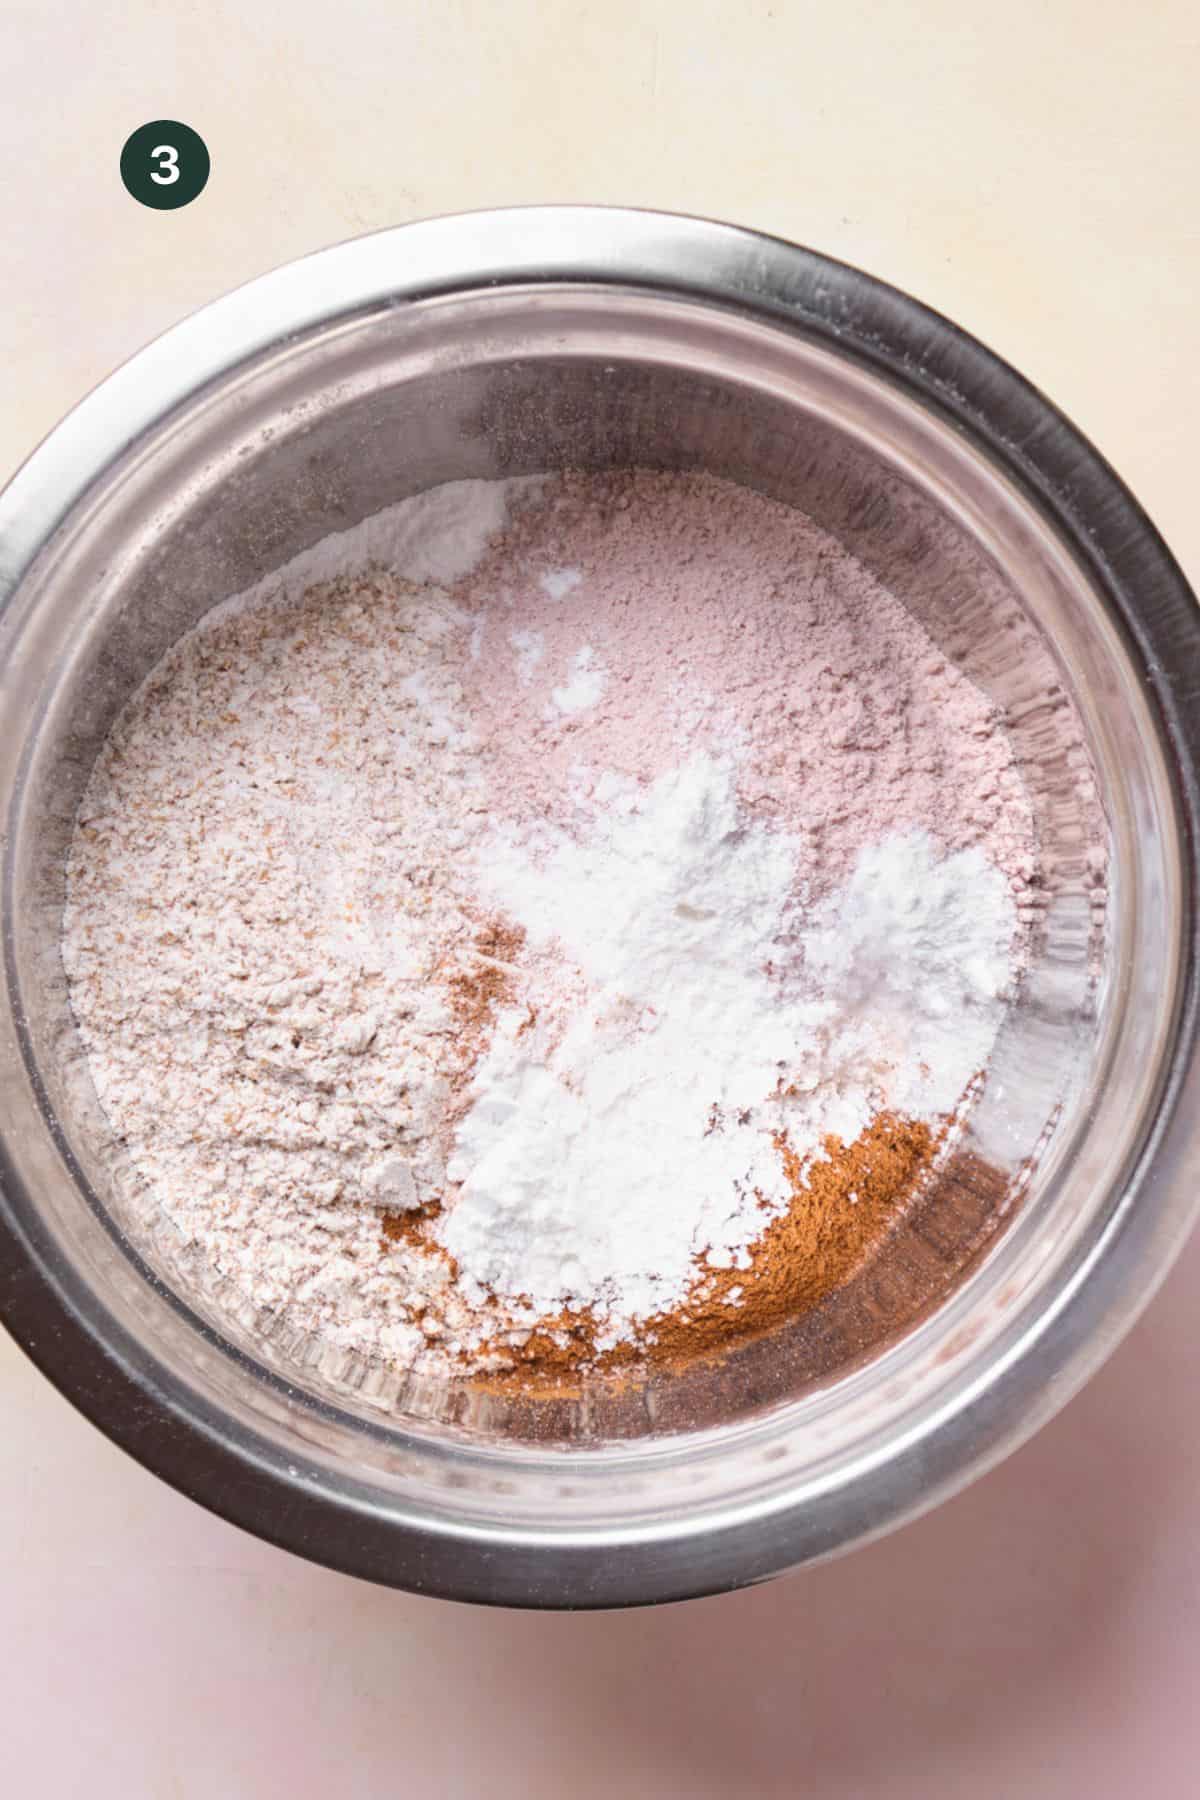 Dry ingredients fully combined in a bowl. 